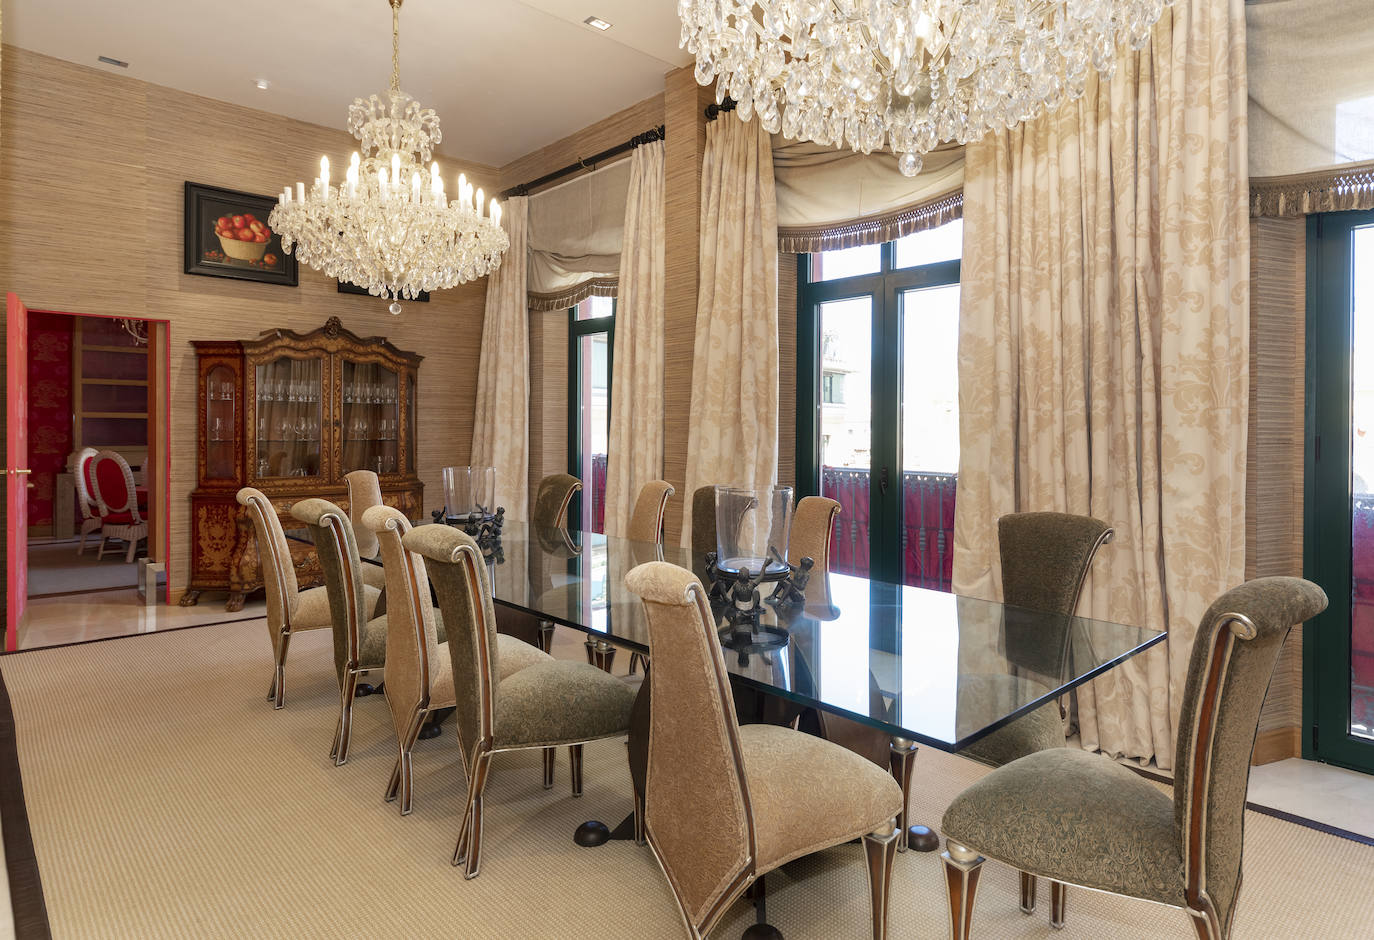 Take a tour of the most expensive pre-owned apartment in Malaga, in pictures